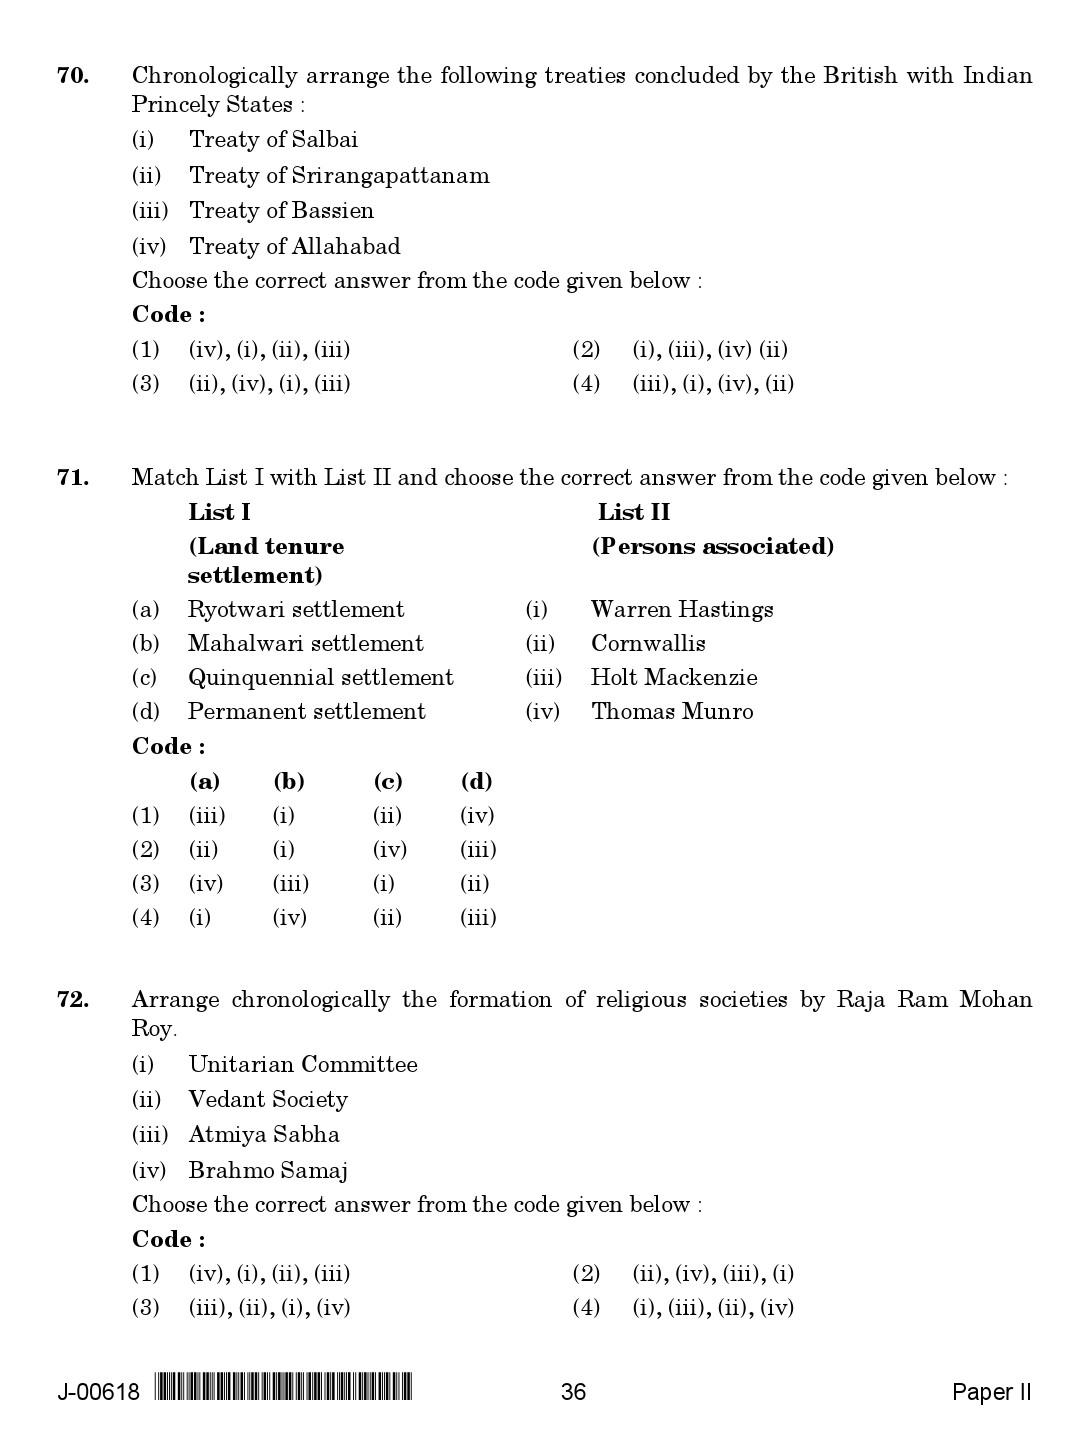 History Question Paper II July 2018 in English 2nd Exam 19